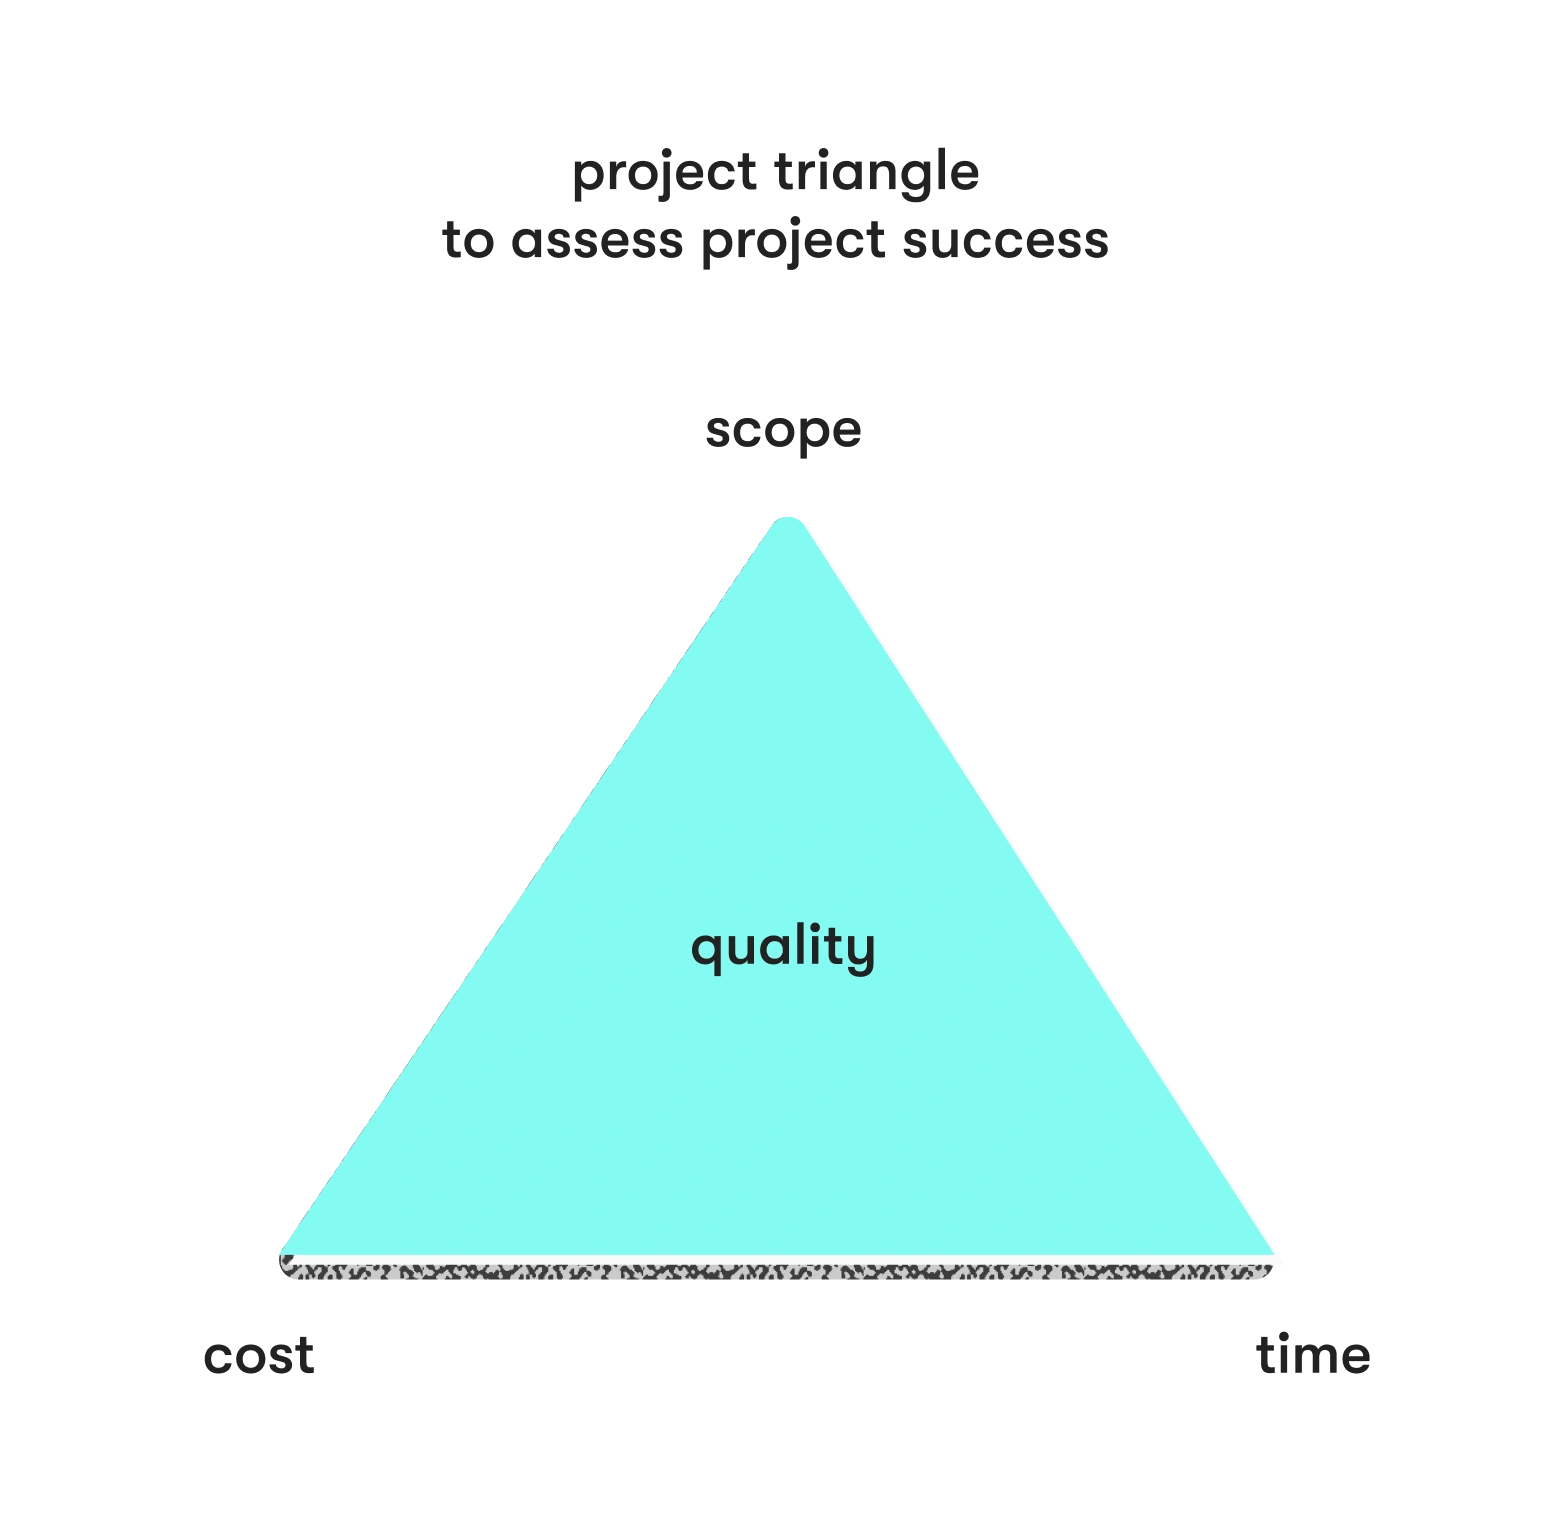 project triangle model for project success estimation